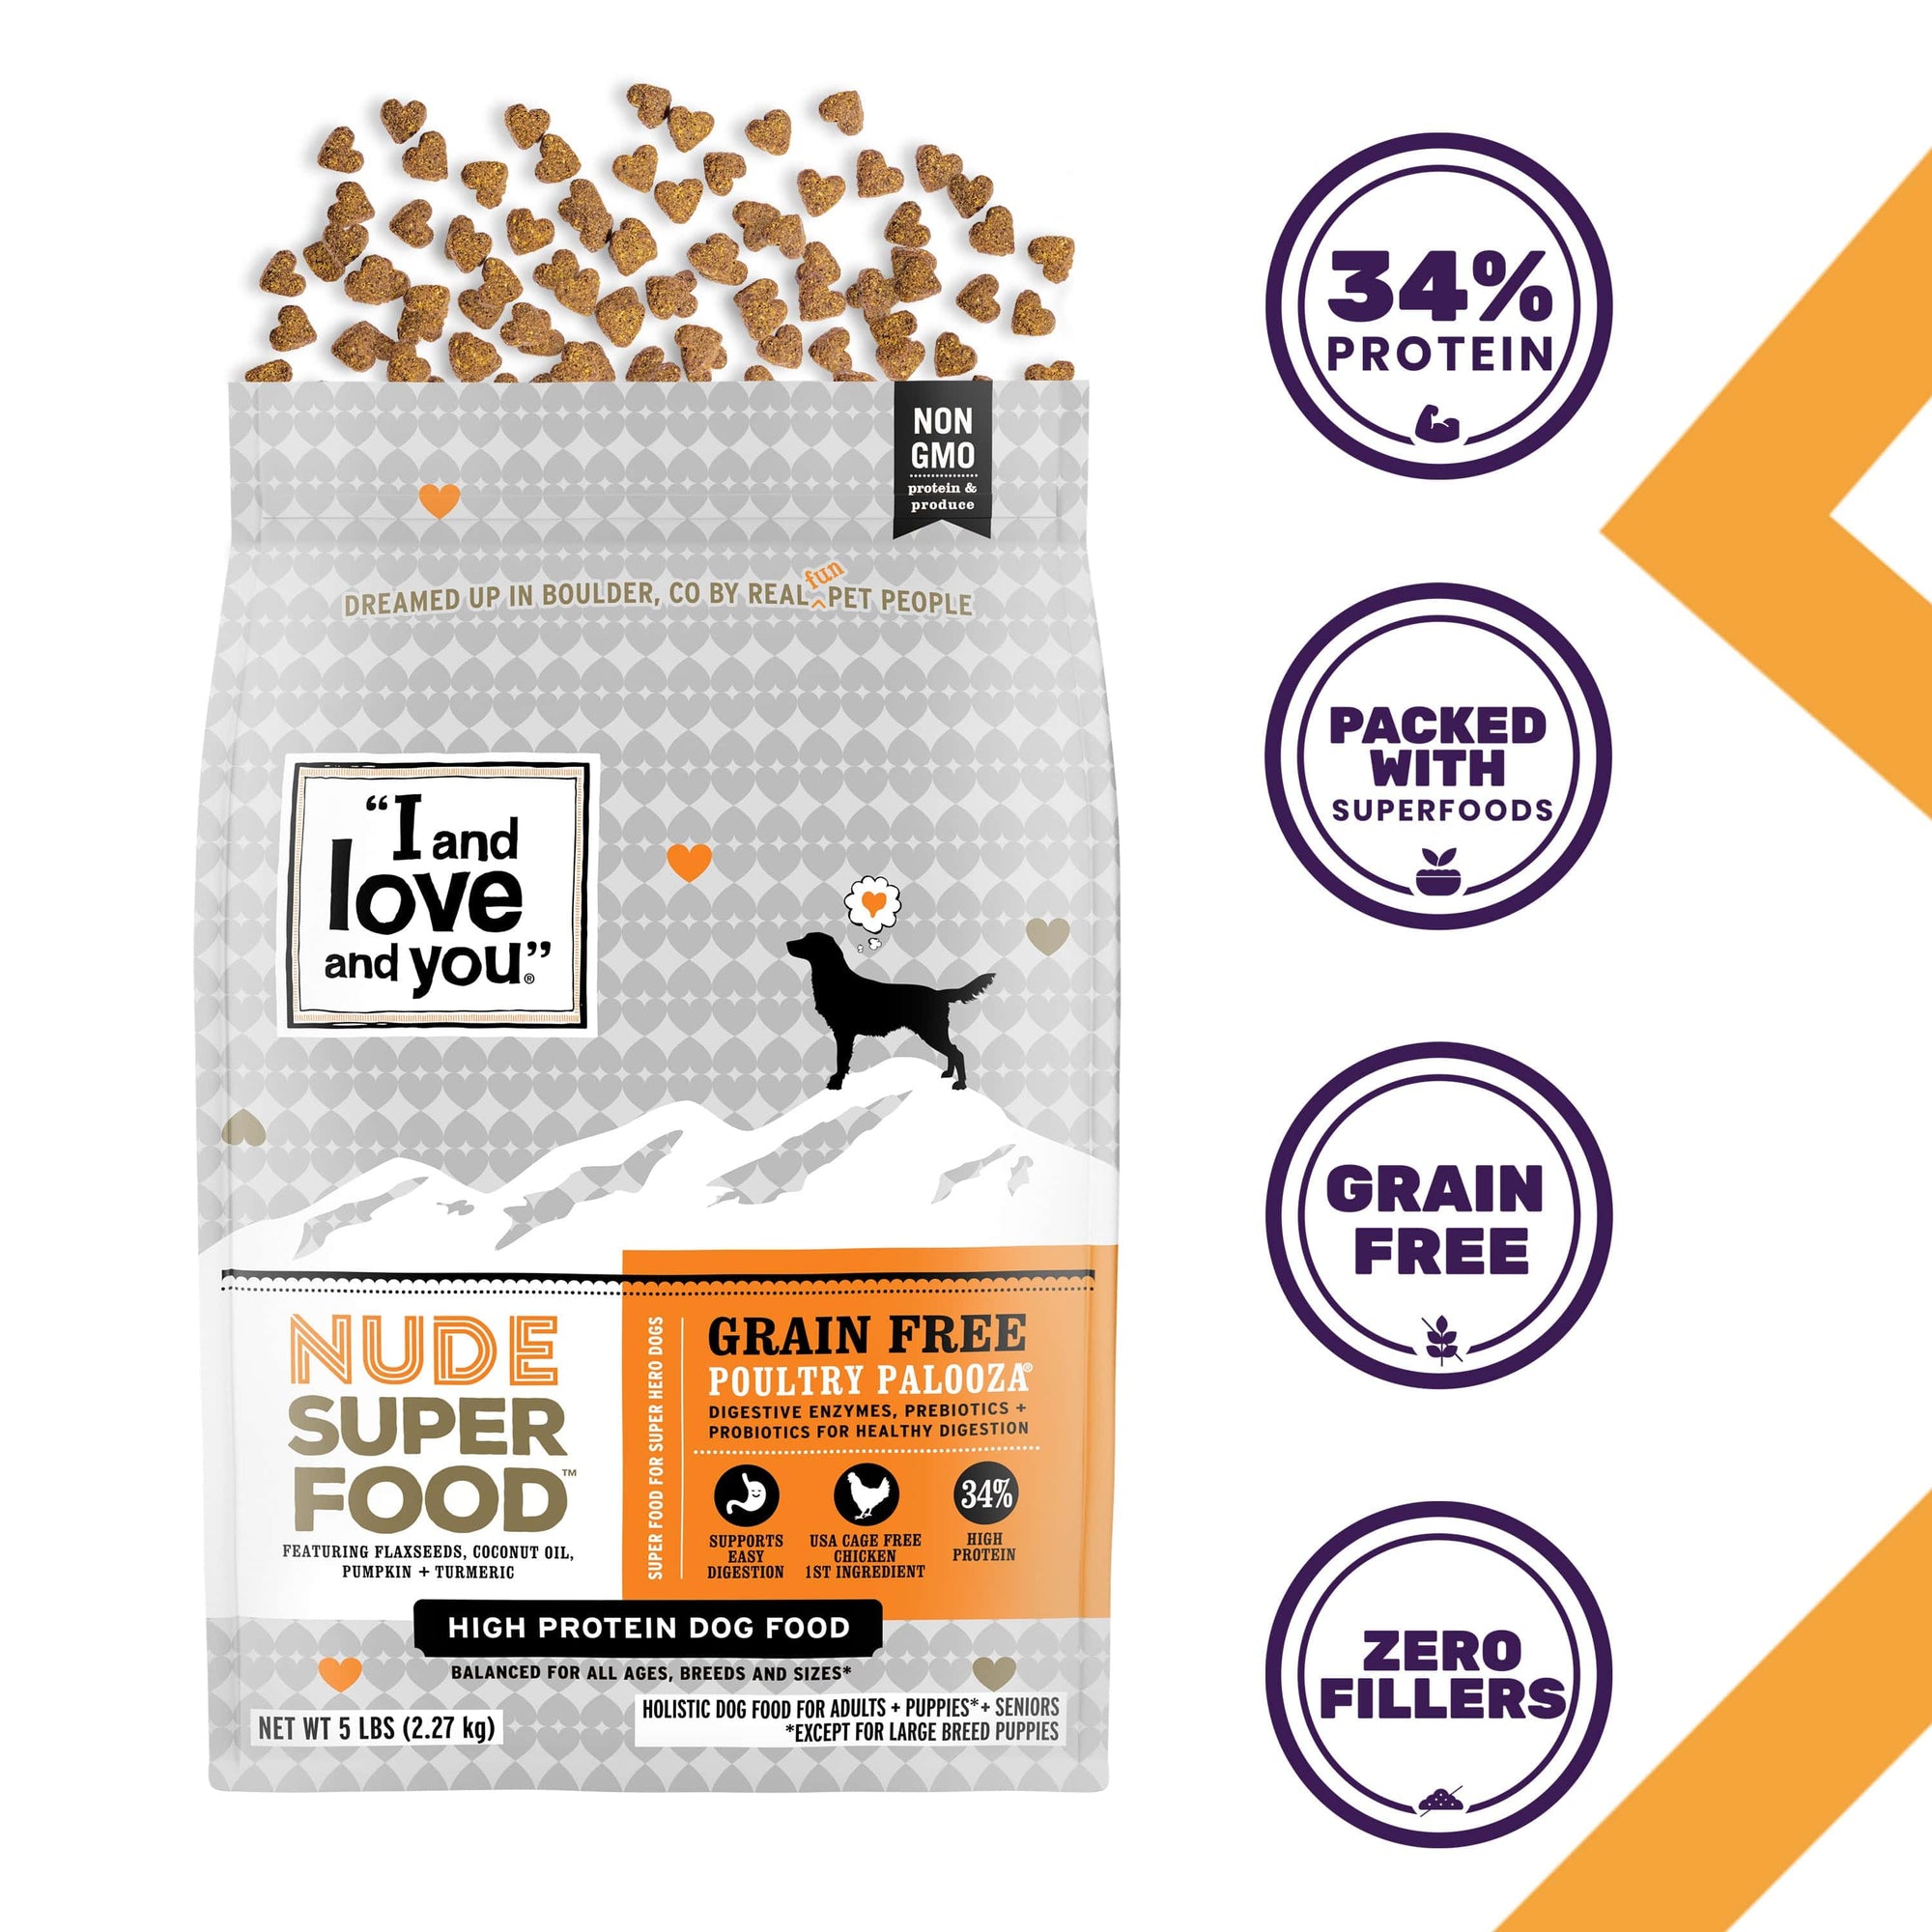 Nude Super Food - Poultry Palooza bag with dog silhouette, label, signs, and heart-shaped pet food pile.